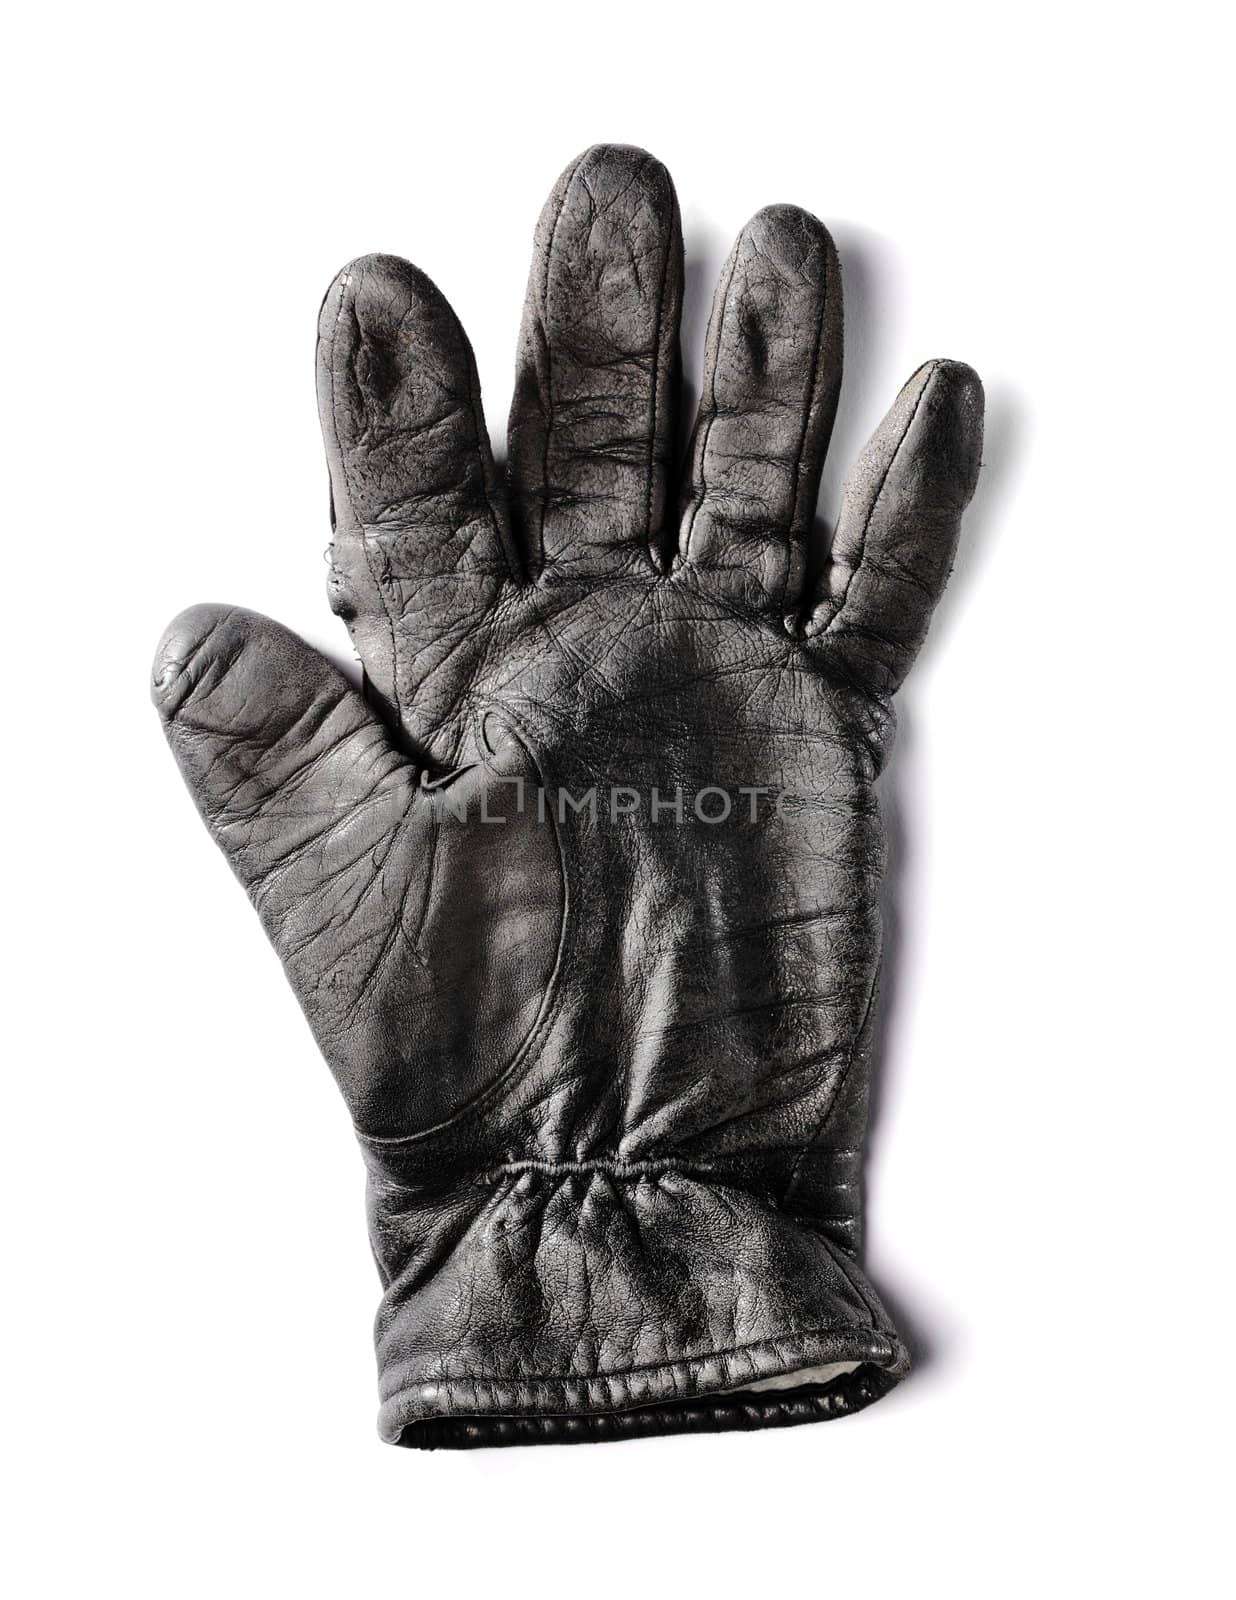 Old Glove by Stocksnapper